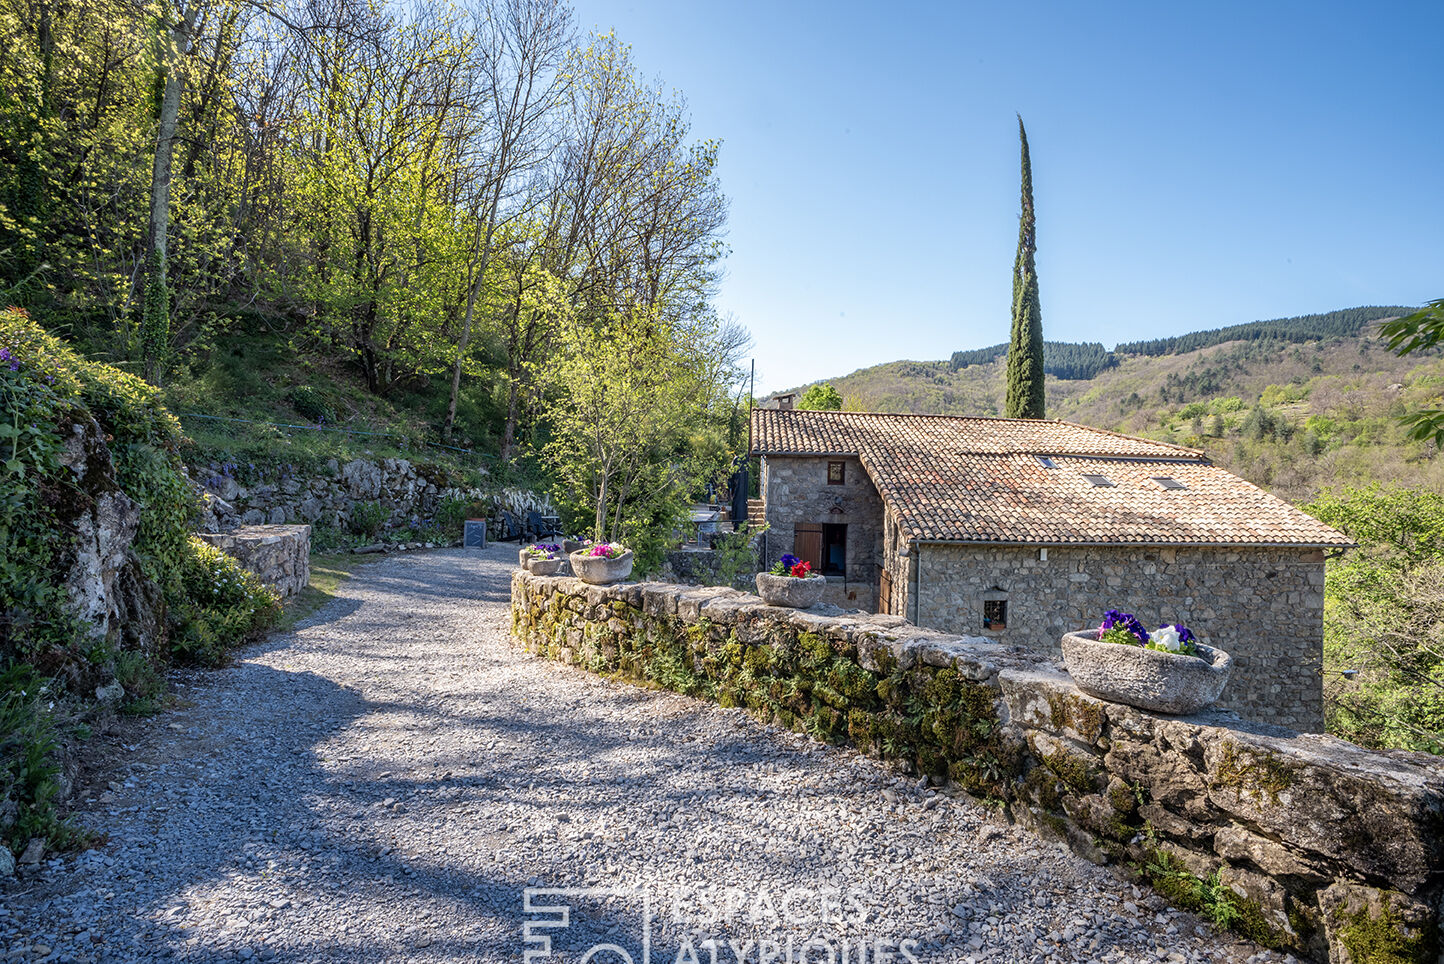 Authentic restored stone house overlooking 16 hectares of land